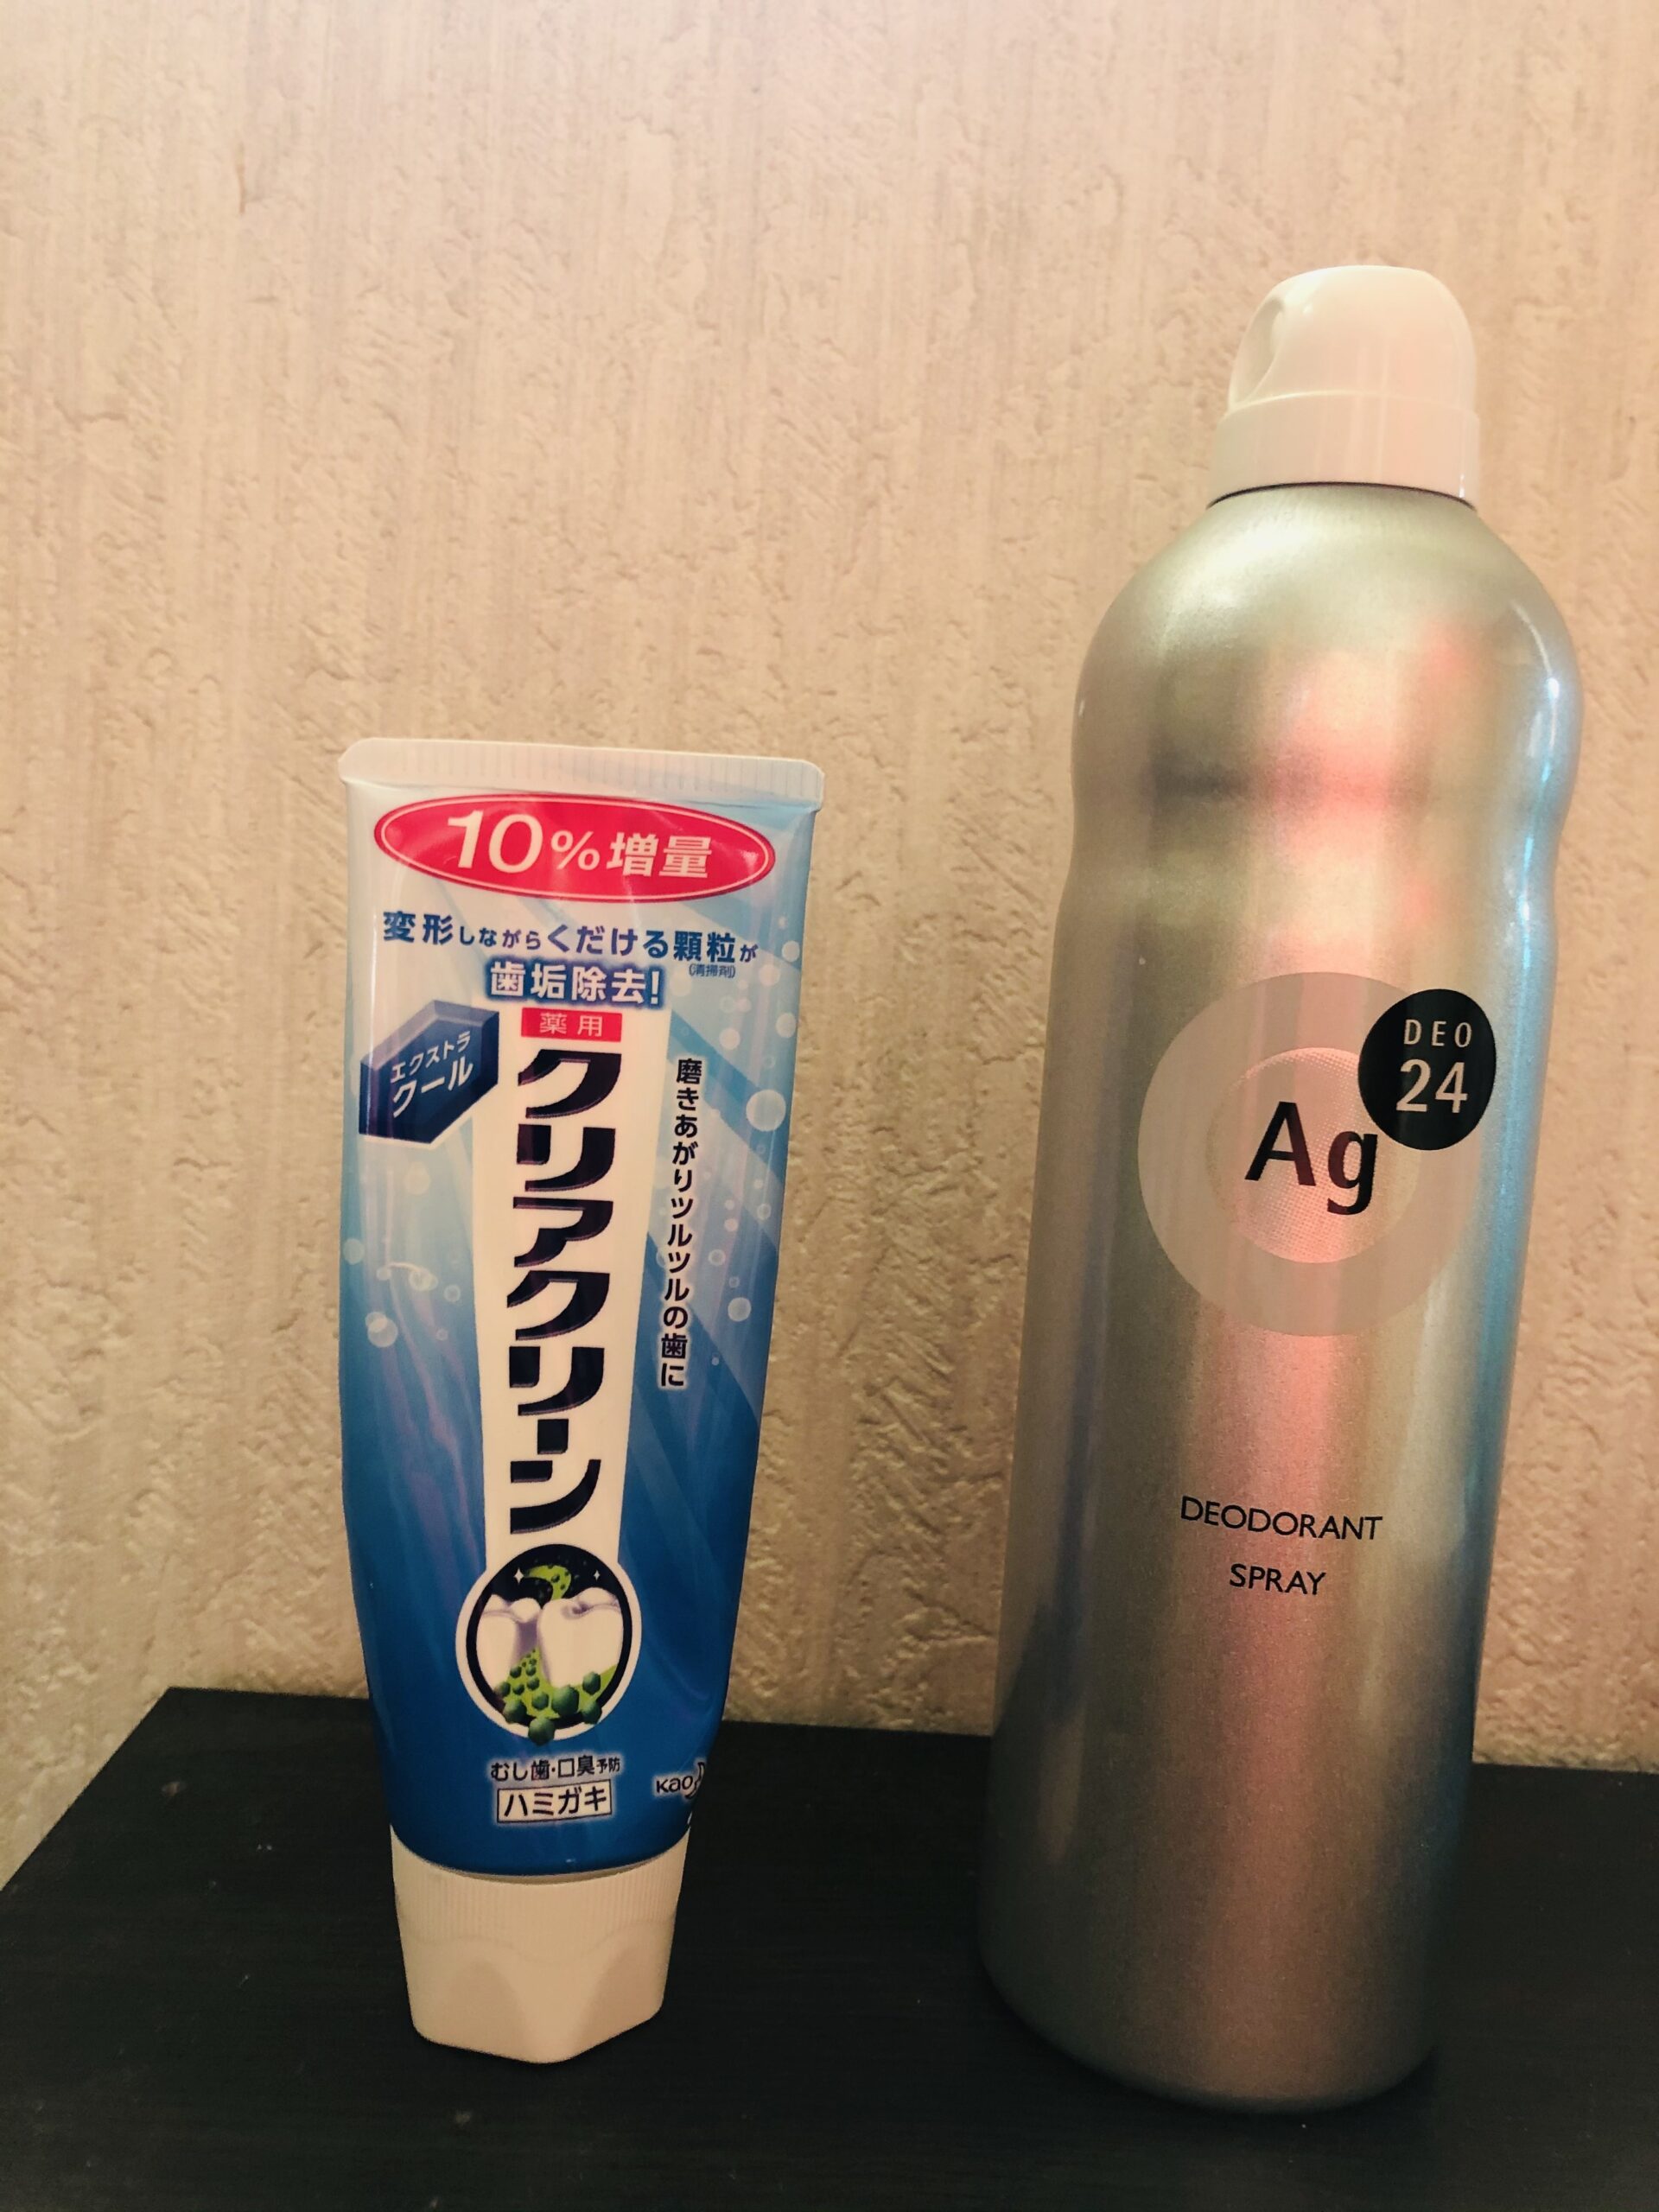 Personal products in Japan vs US